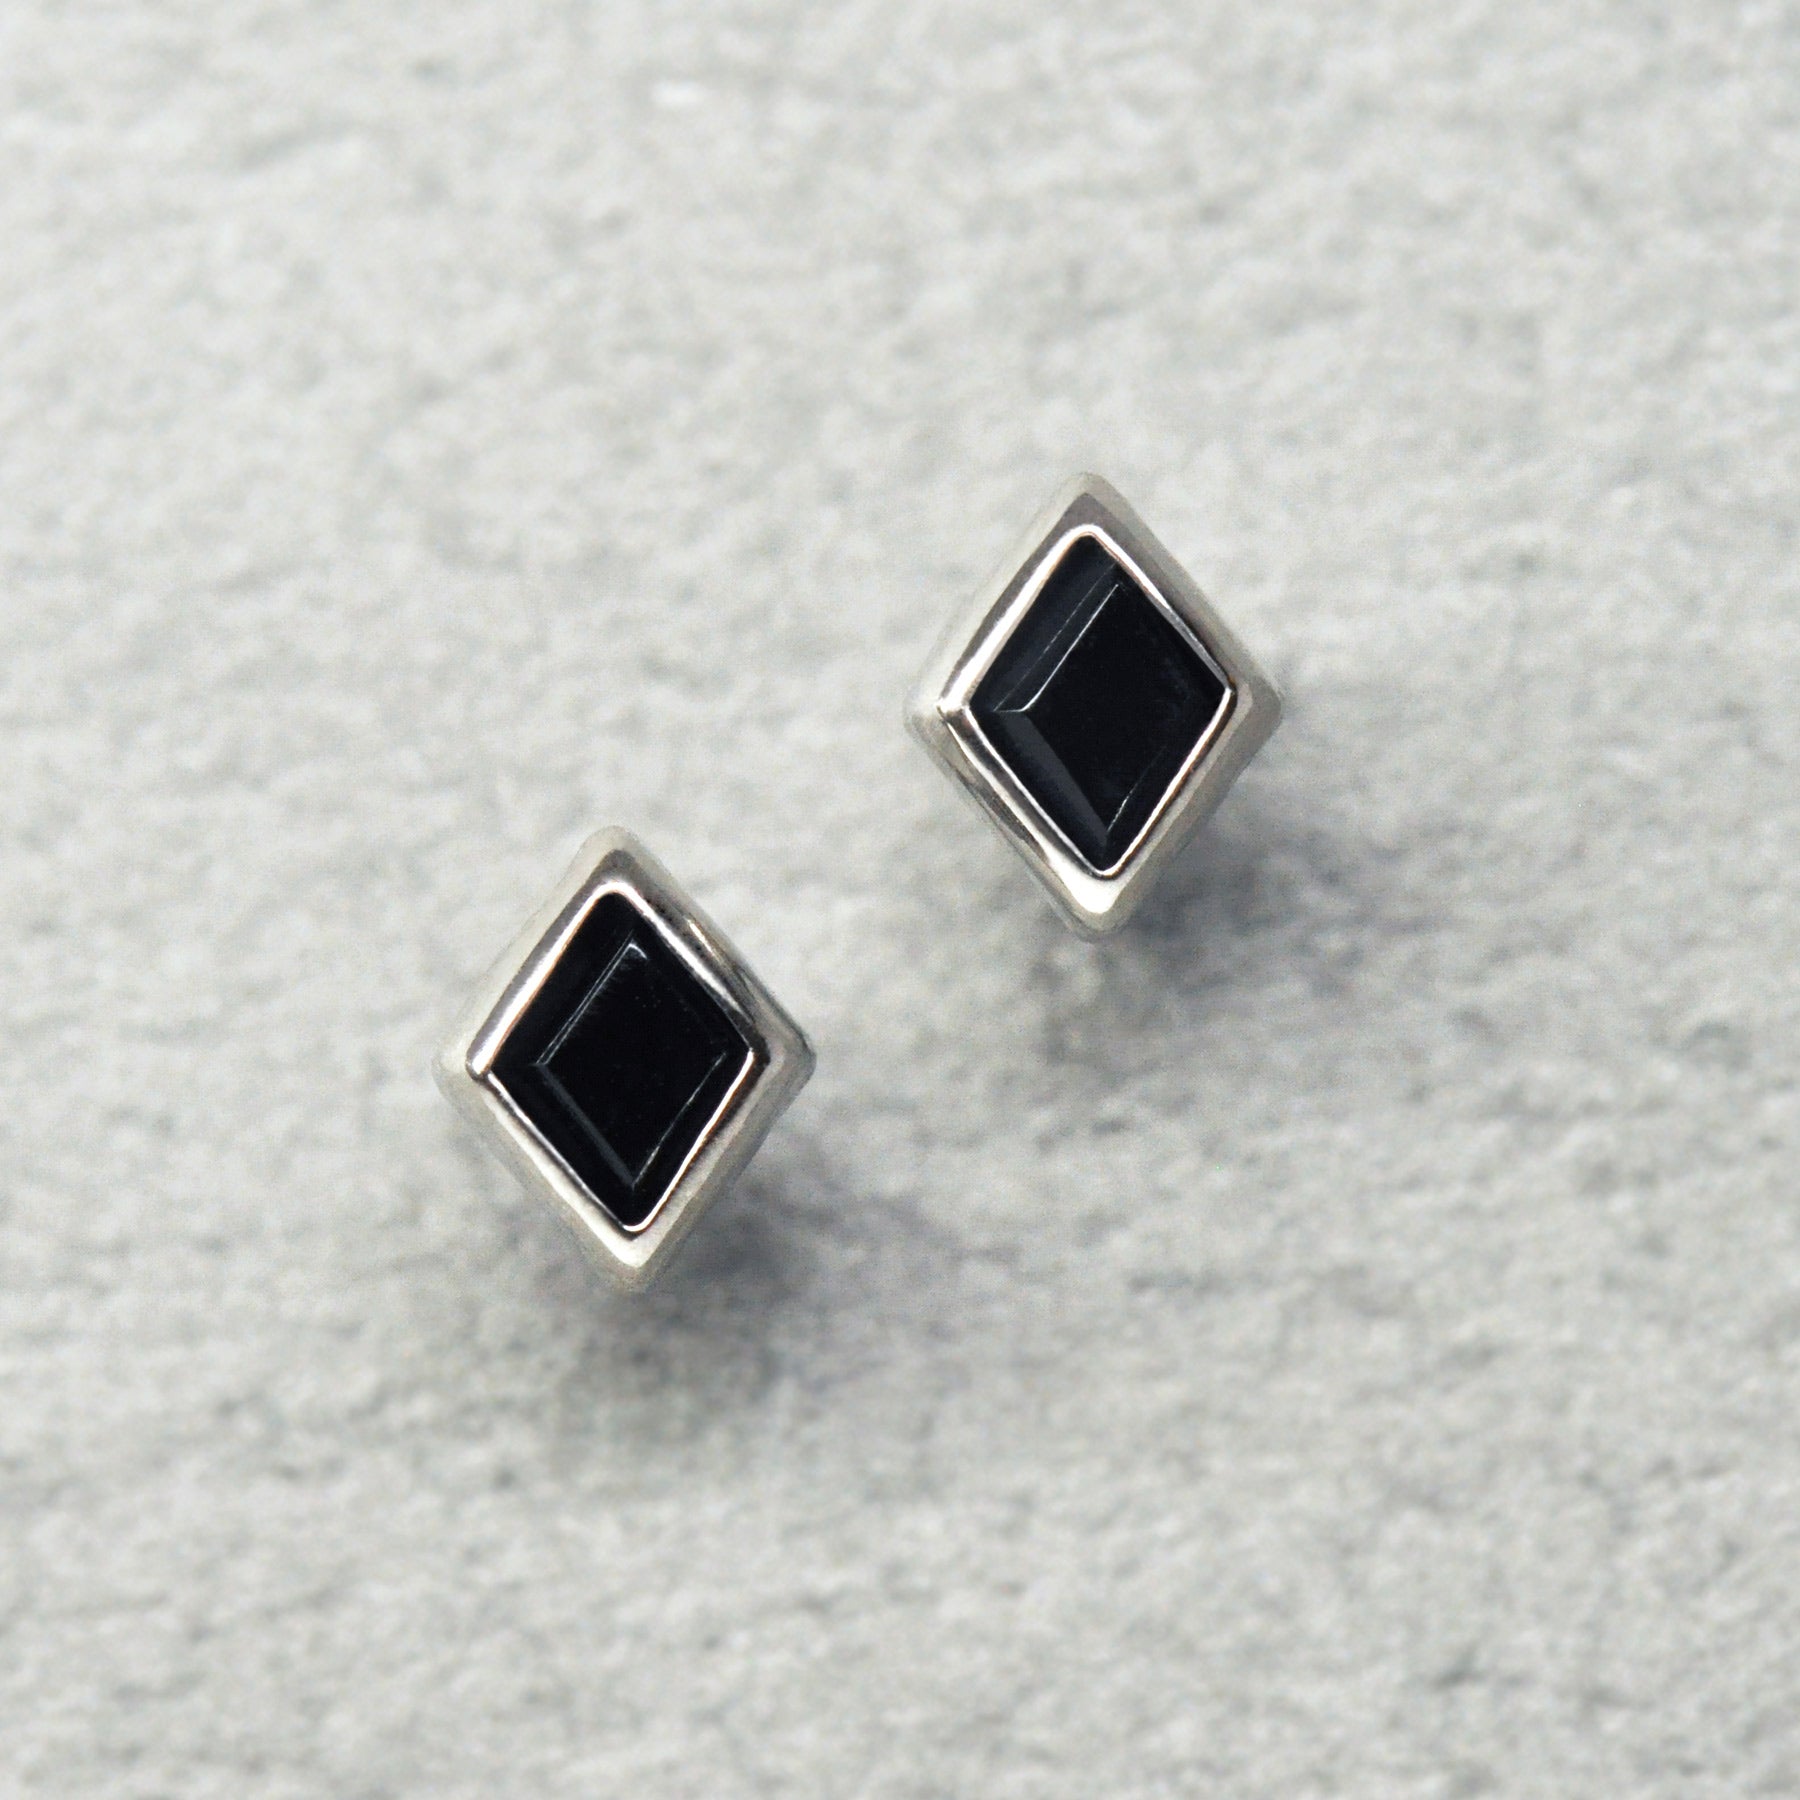 [Second Earrings] Platinum Onyx Earrings - Product Image